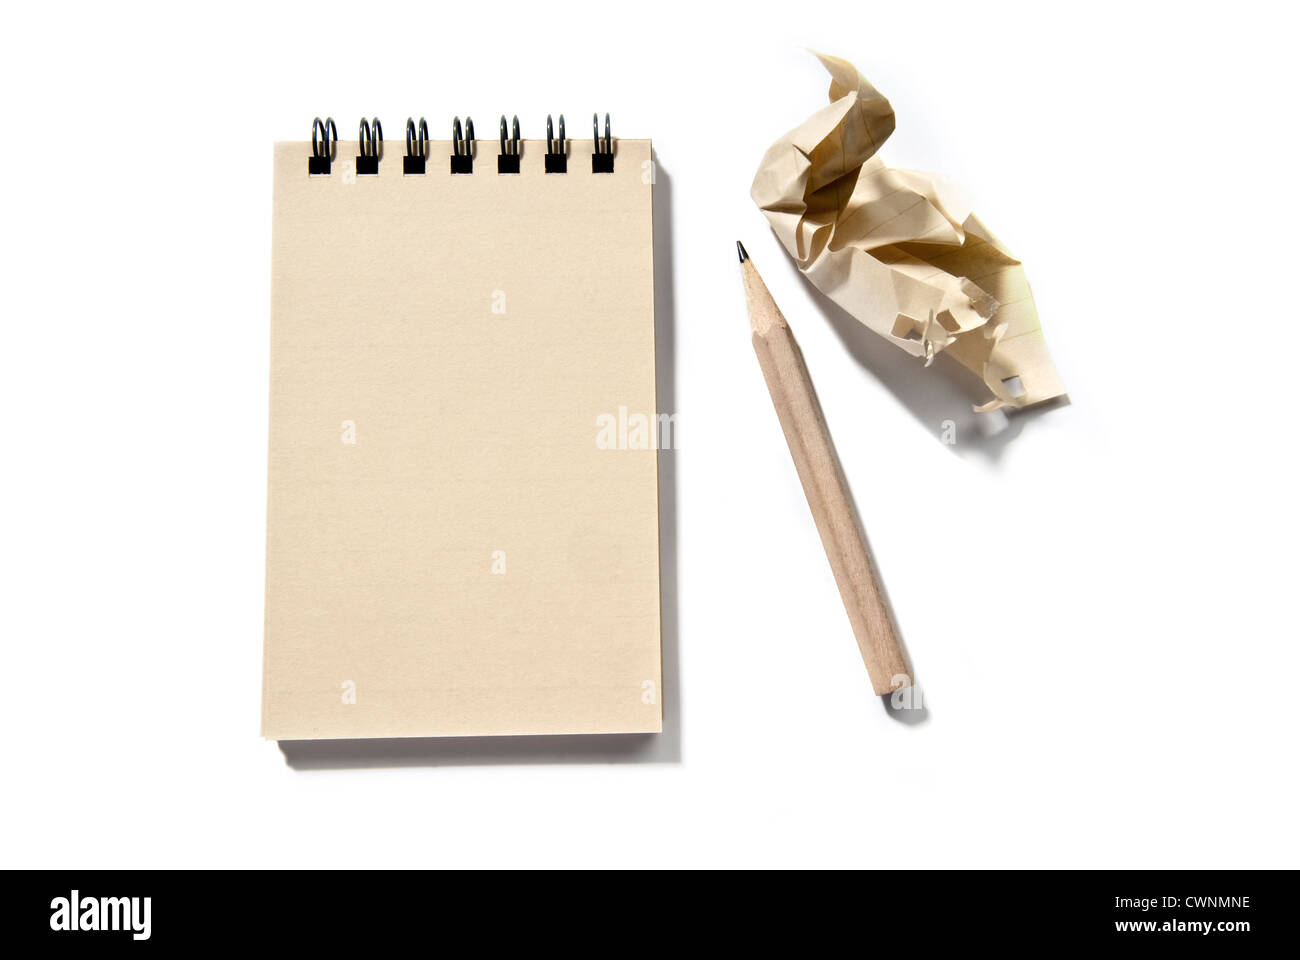 Notepad, blank, with a pencil and a piece of crumpled paper, isolated on 100% white background Stock Photo